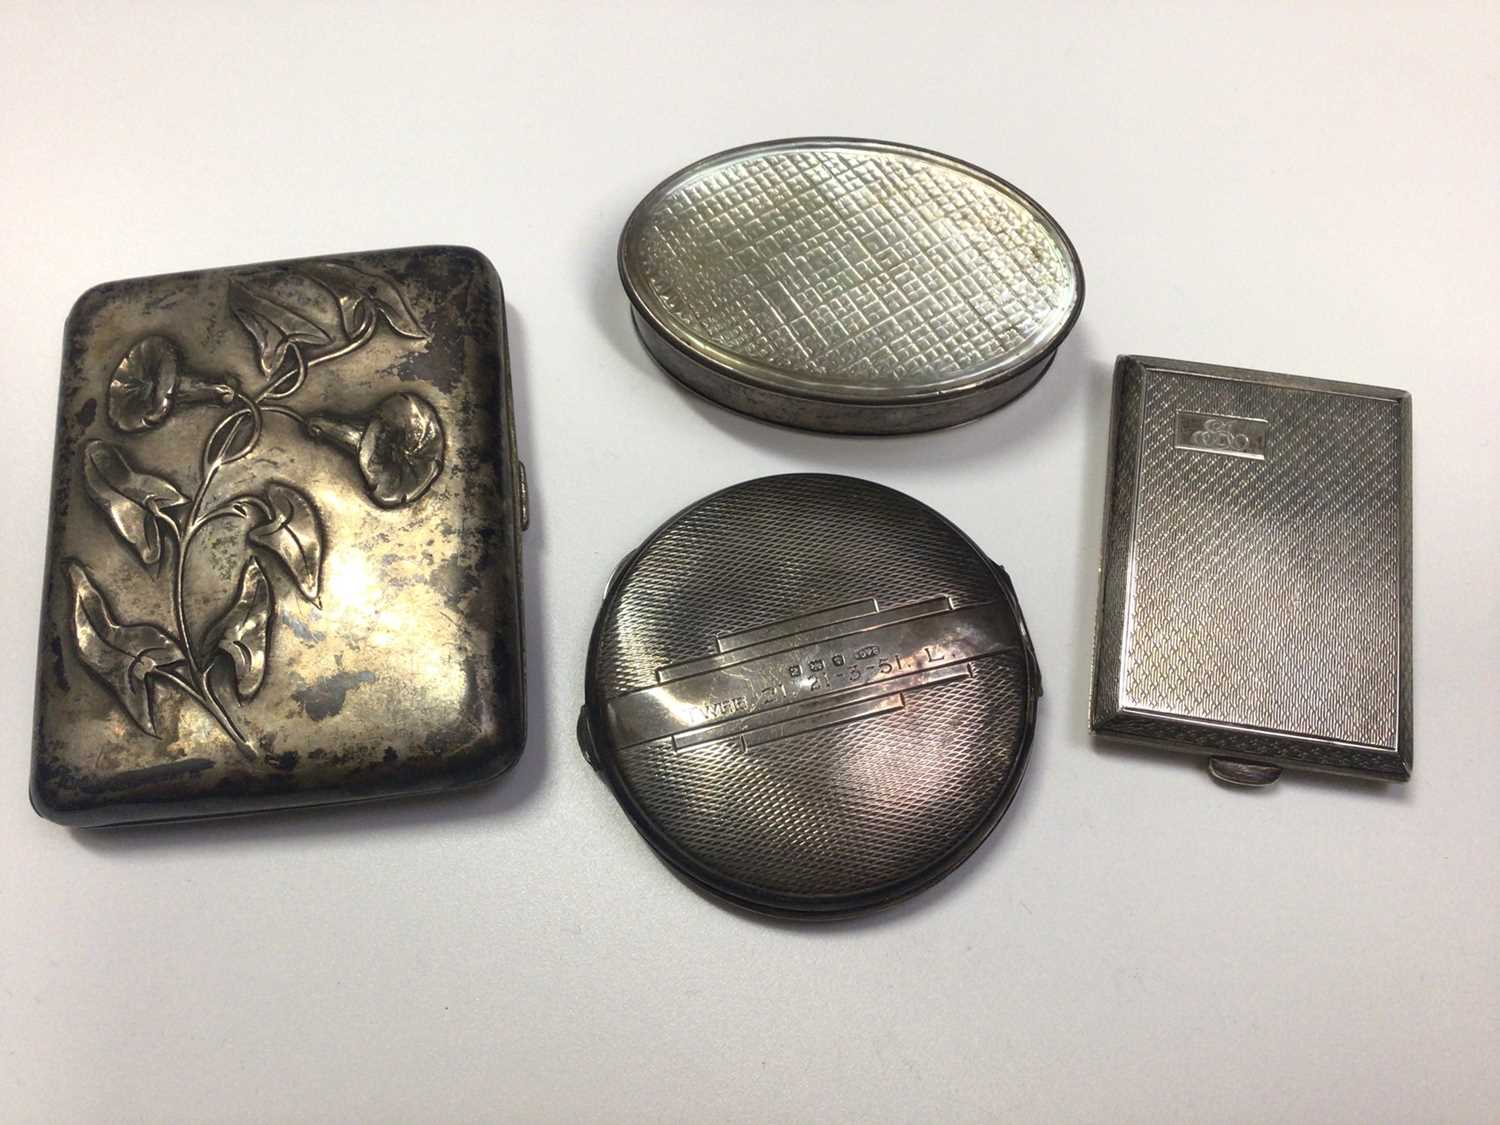 Lot 12 - French silver cigarette case with embossed floral decoration, small silver card case, silver powder compact and white metal oval trinket box with mother of pearl cover